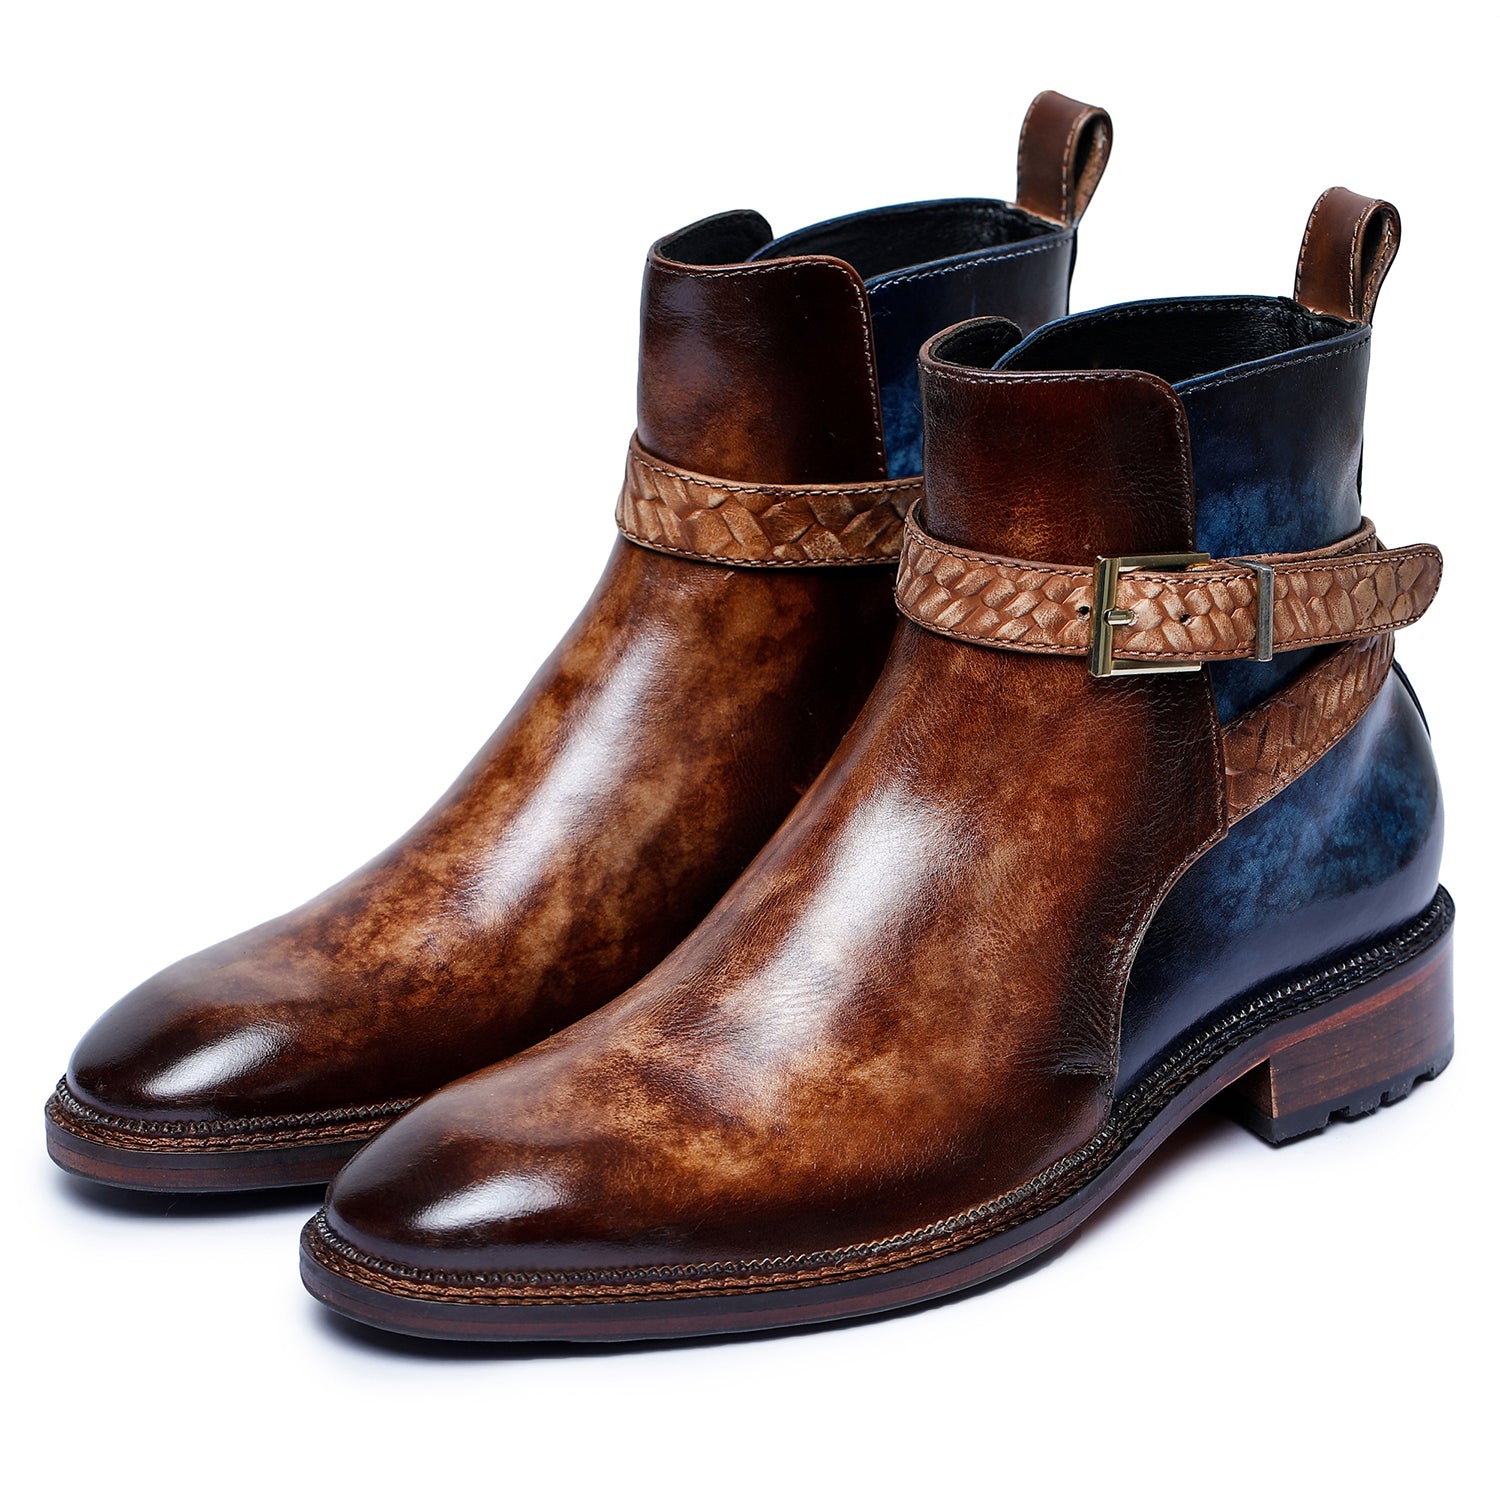 Best Men's Boots - 7 Reasons Boots Are BETTER Than Shoes